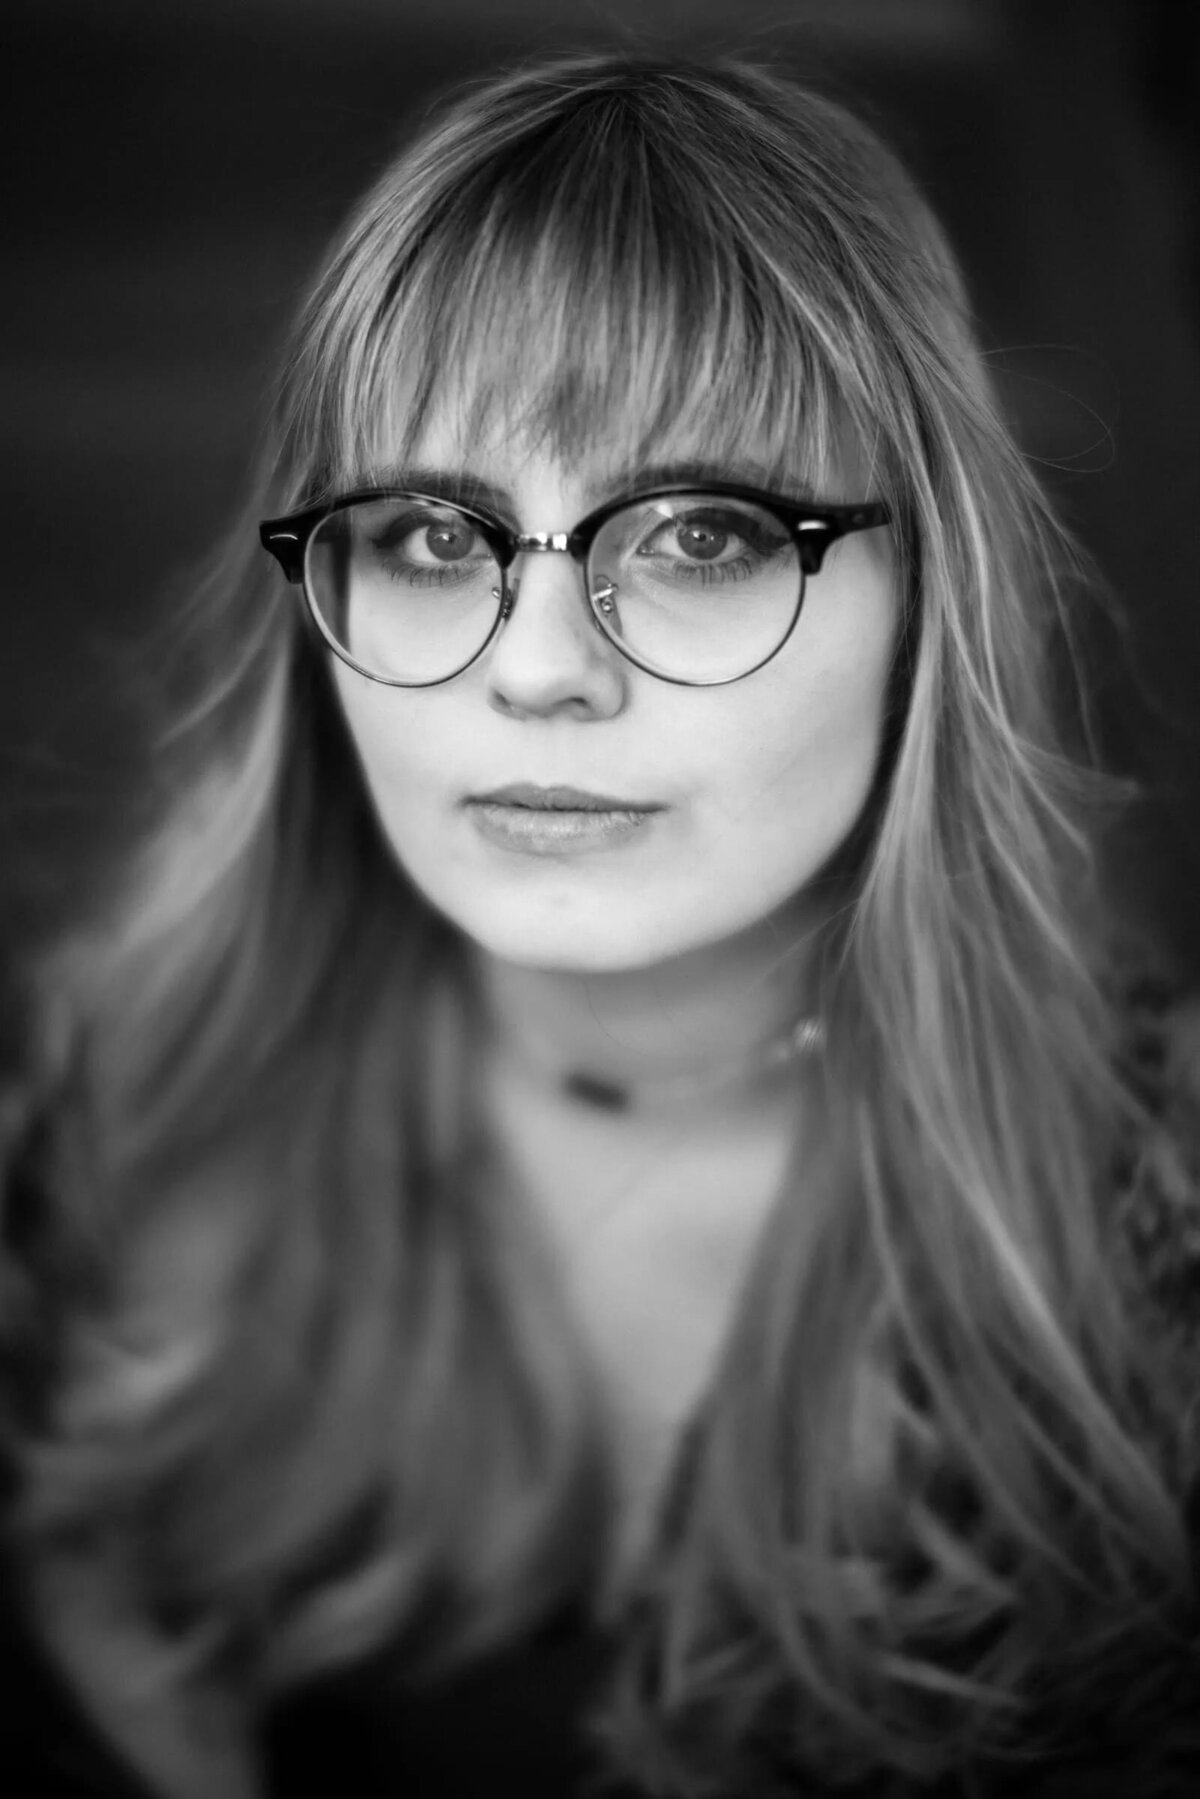 Black and white photo of a woman with large round glasses.